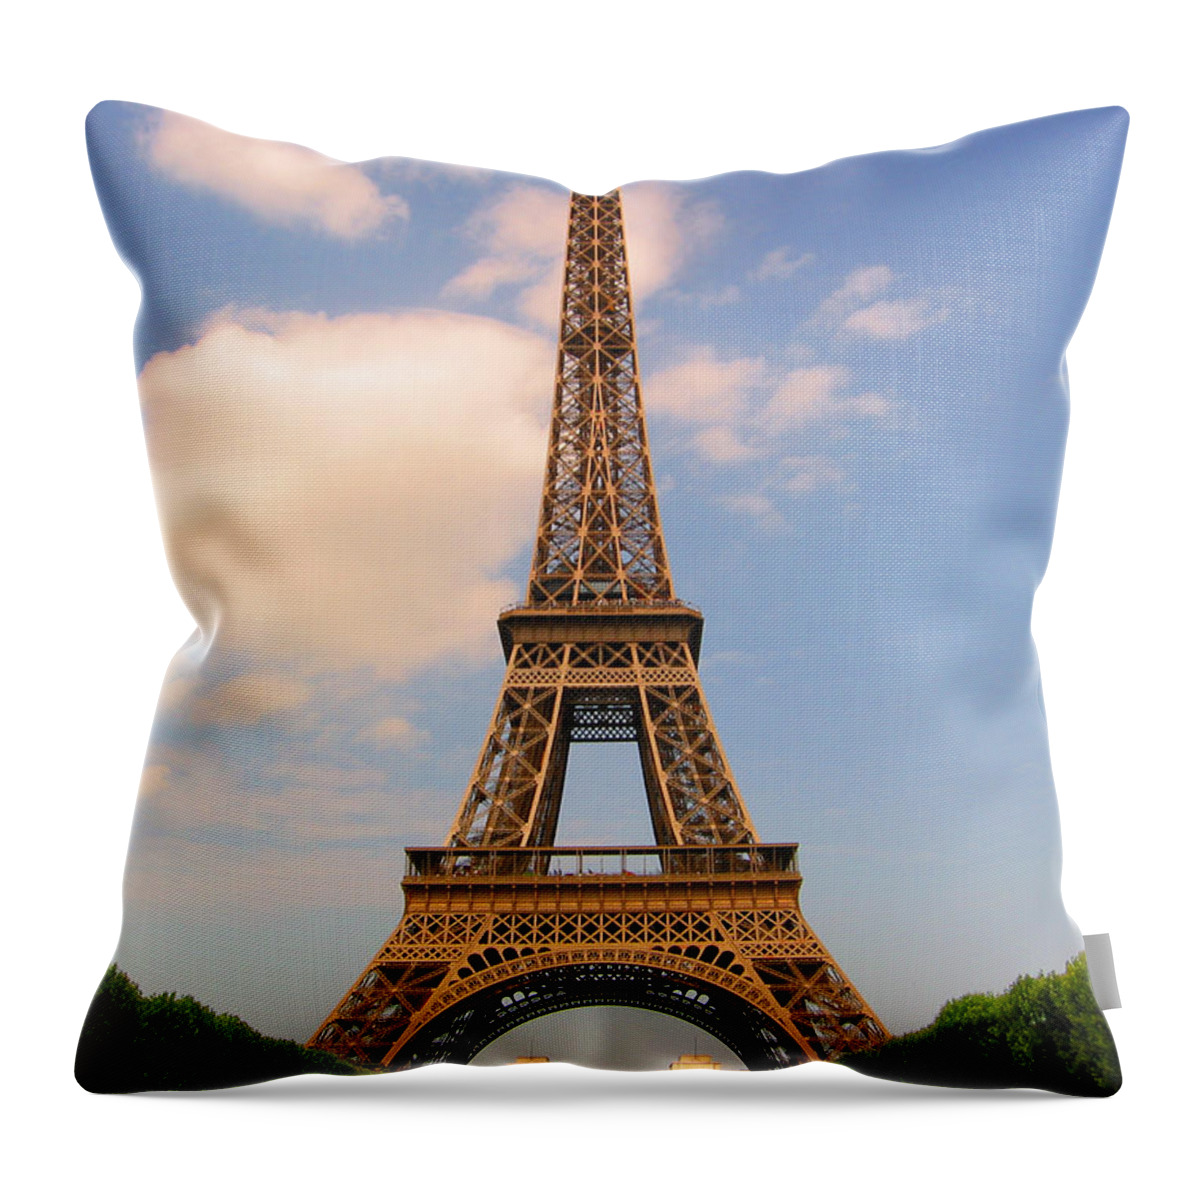 School Carnival Throw Pillow featuring the photograph Eiffel Tower by Jcarter